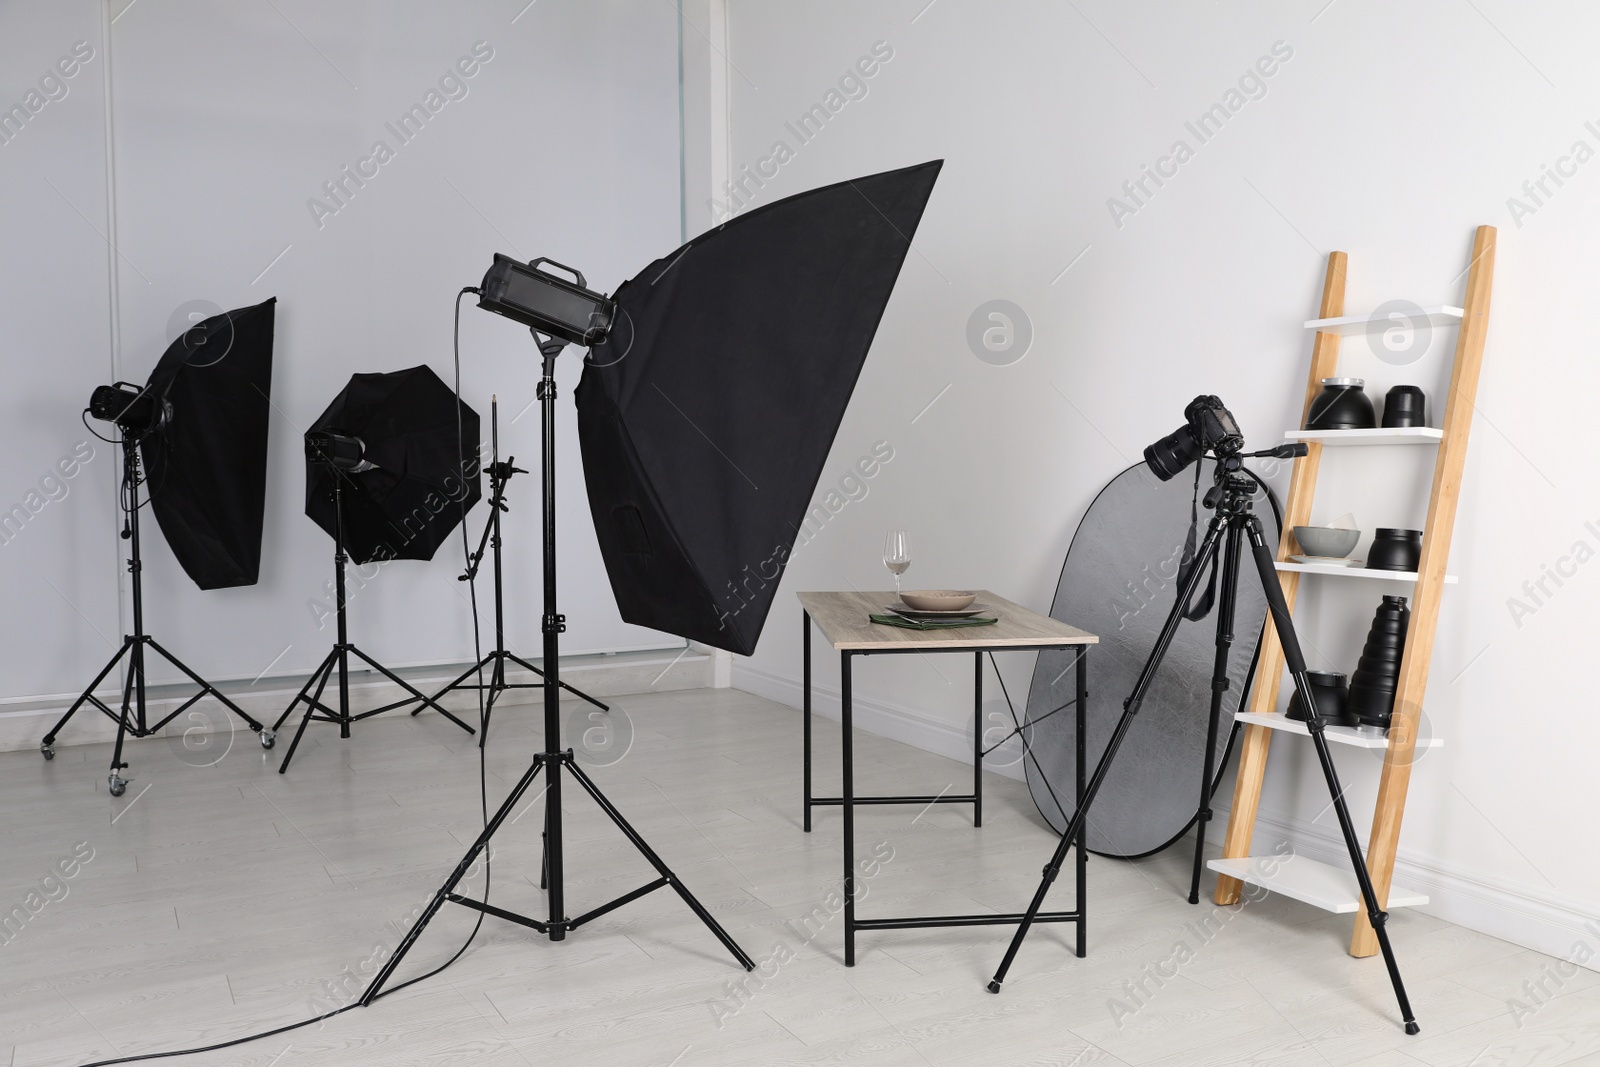 Photo of Table with stylish dinnerware in front of camera and professional lighting equipment indoors. Photo studio set